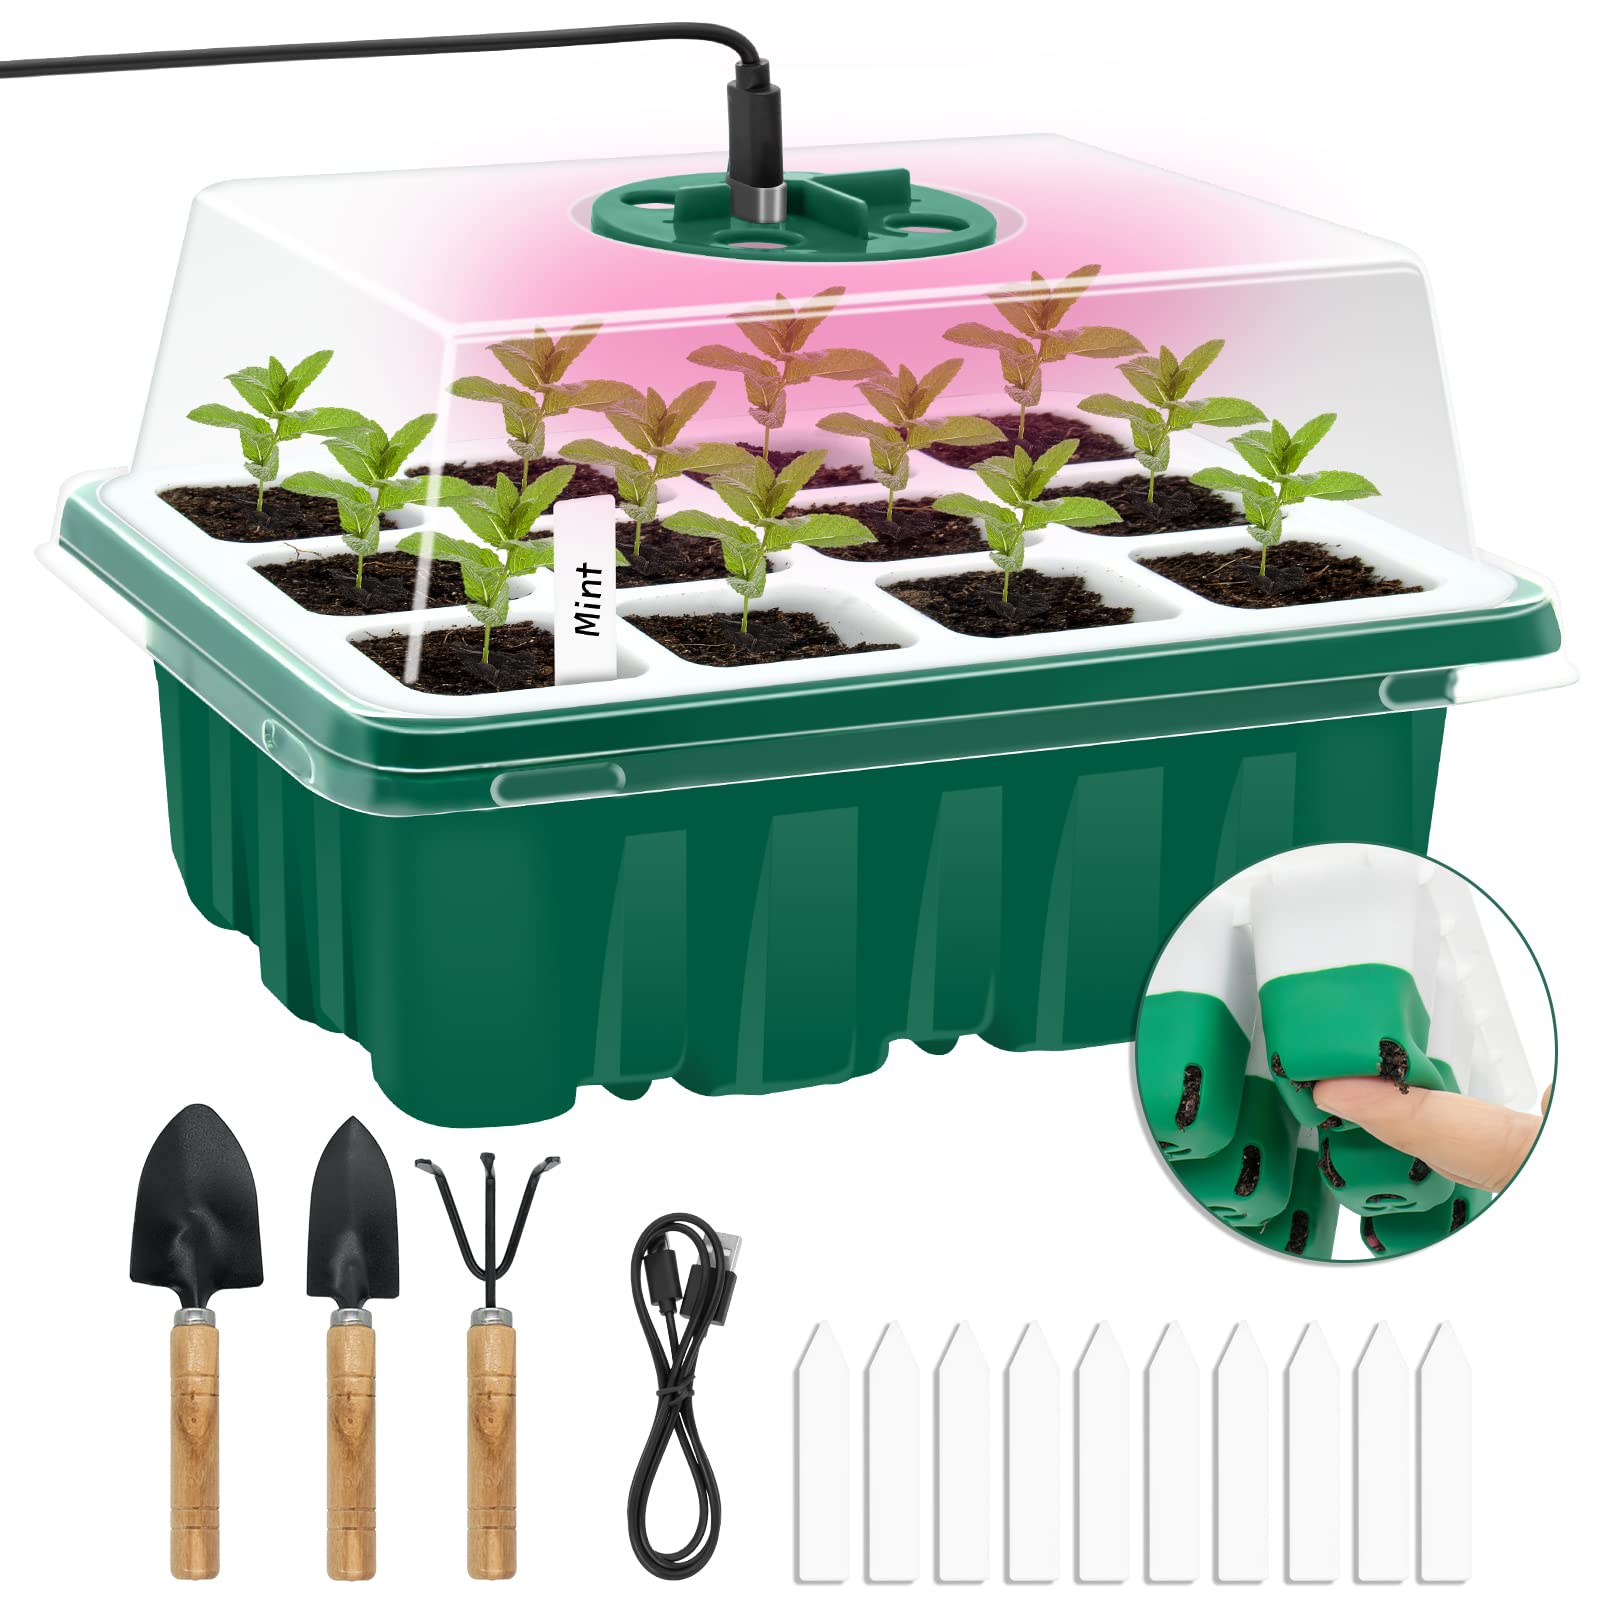 GrJyls 0 Seed Starter Tray Kit With Grow Light 12 Flexible Pop-Out